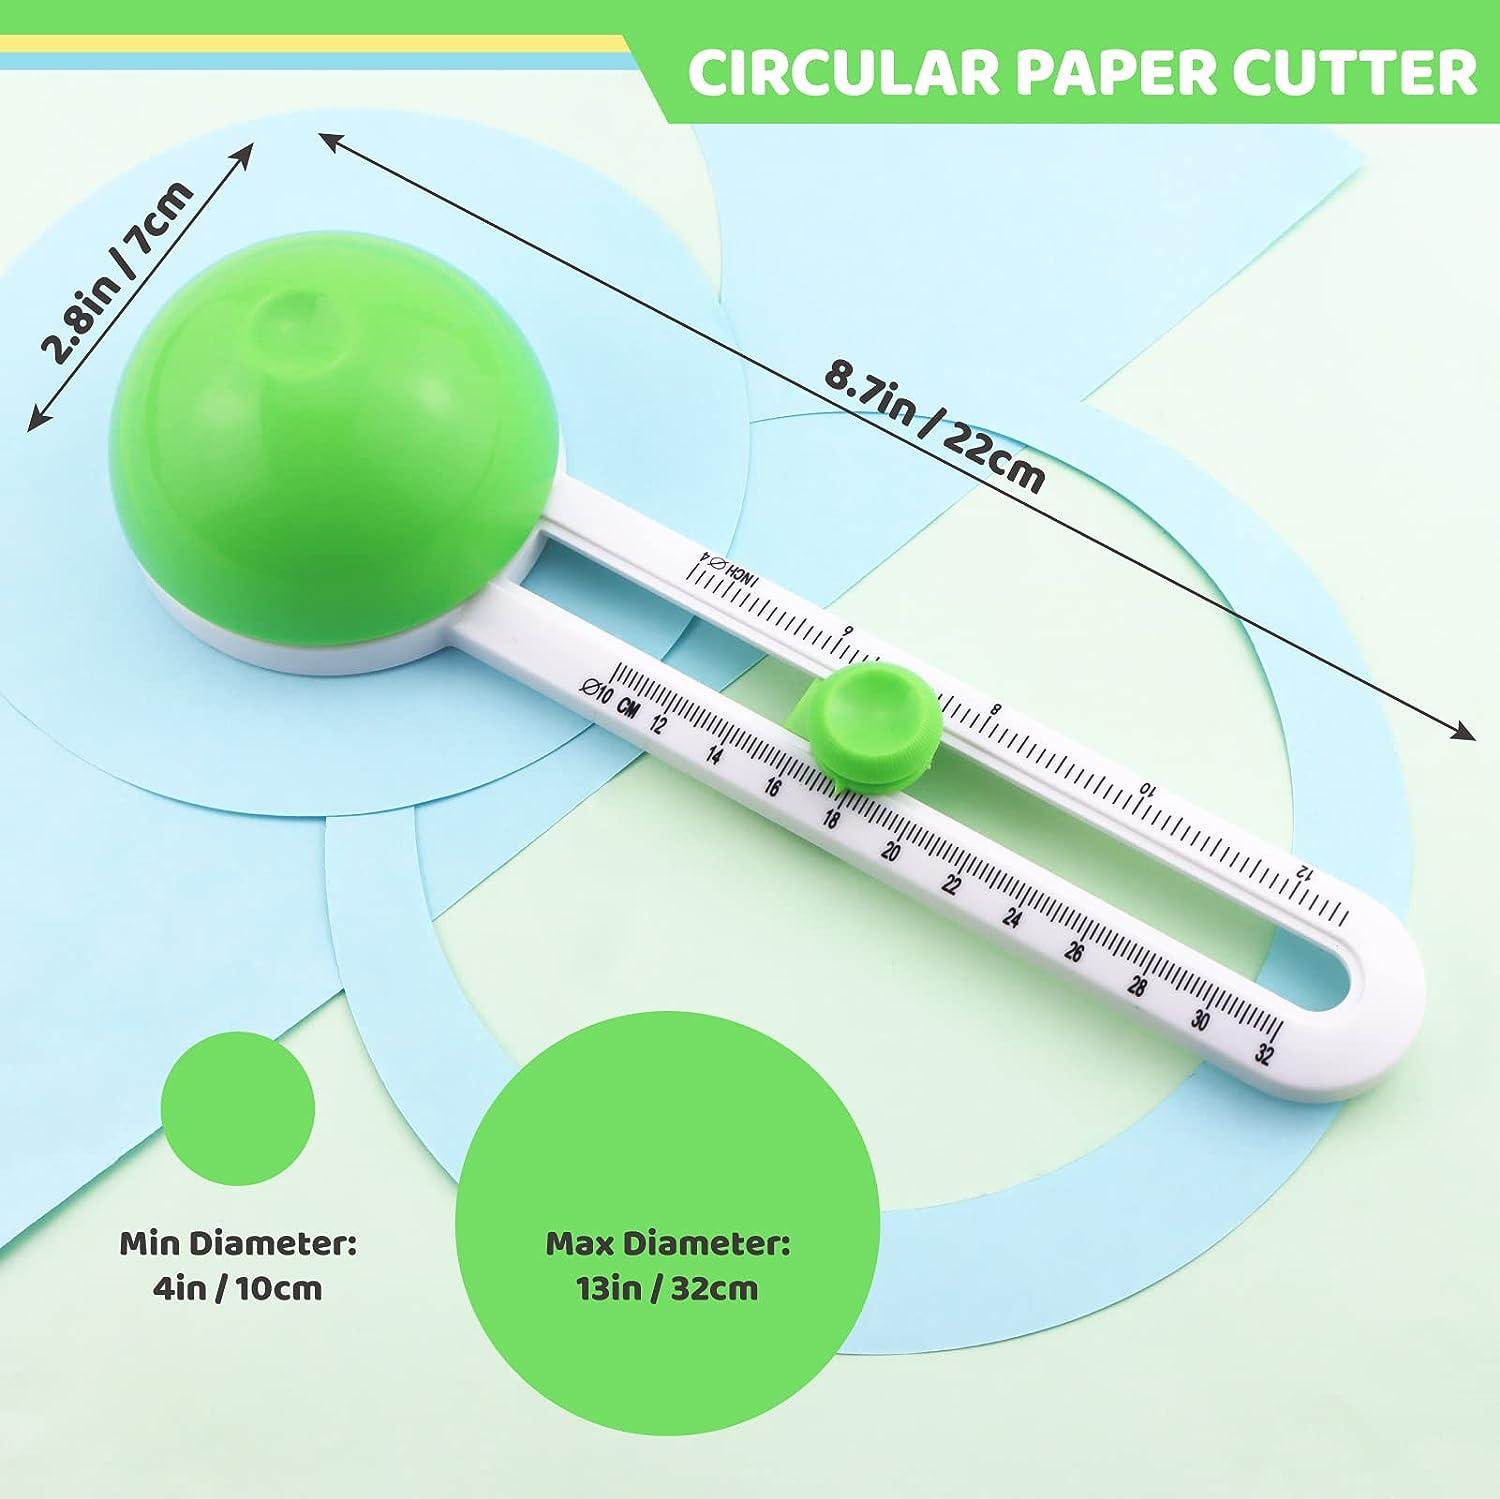 YETOOME Circular Paper Cutter, Rotary Circle Cutter Cut Paper Trimmer  Scrapbooking Tool with 3 Replaceable Blades for Art and DIY Crafts, Cards  Making (Green)